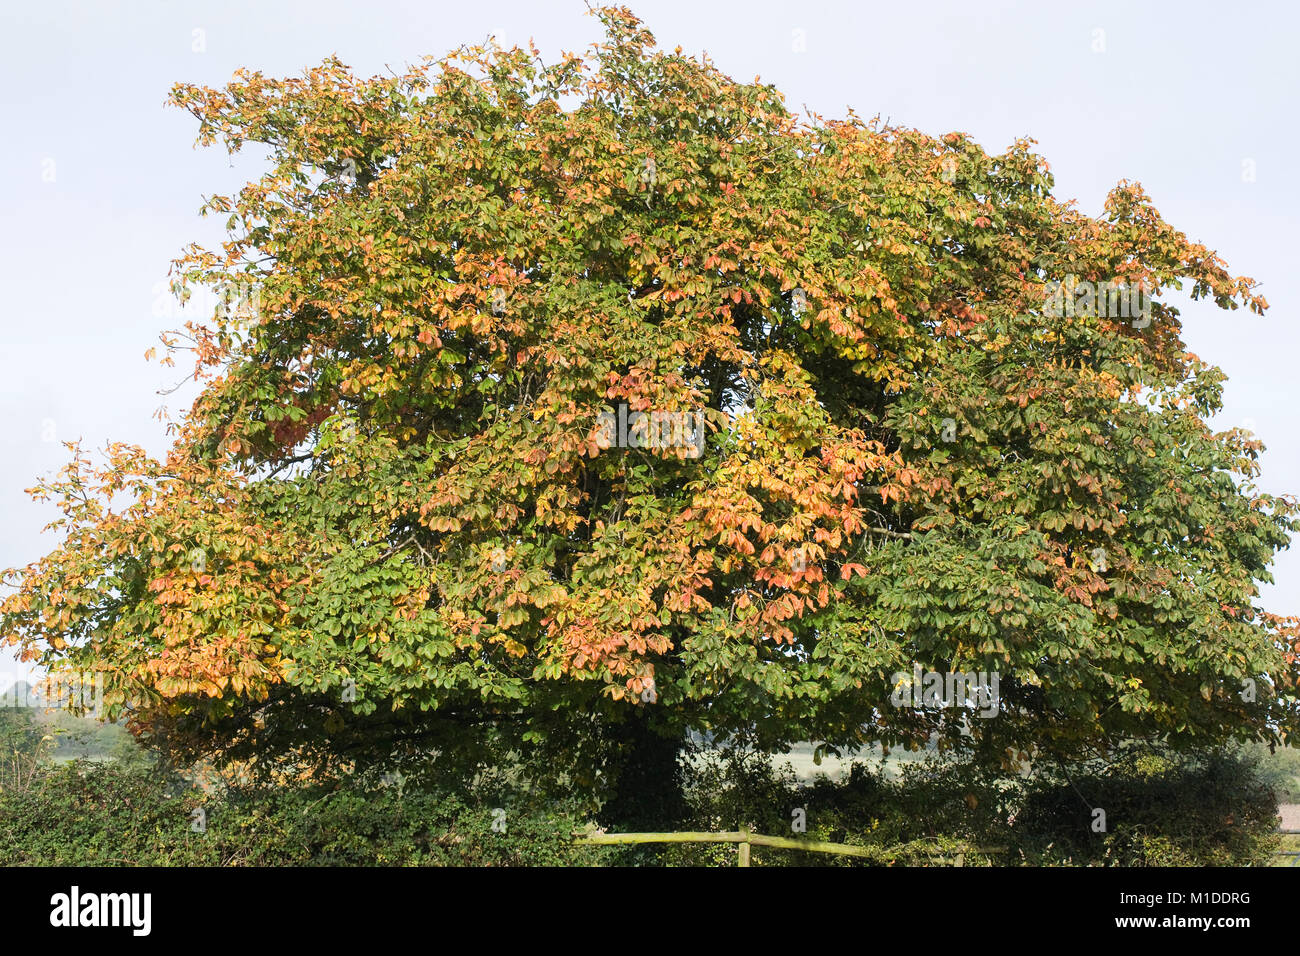 Aesculus hippocastanum. Horse chestnut in the English countryside in Autumn. Stock Photo